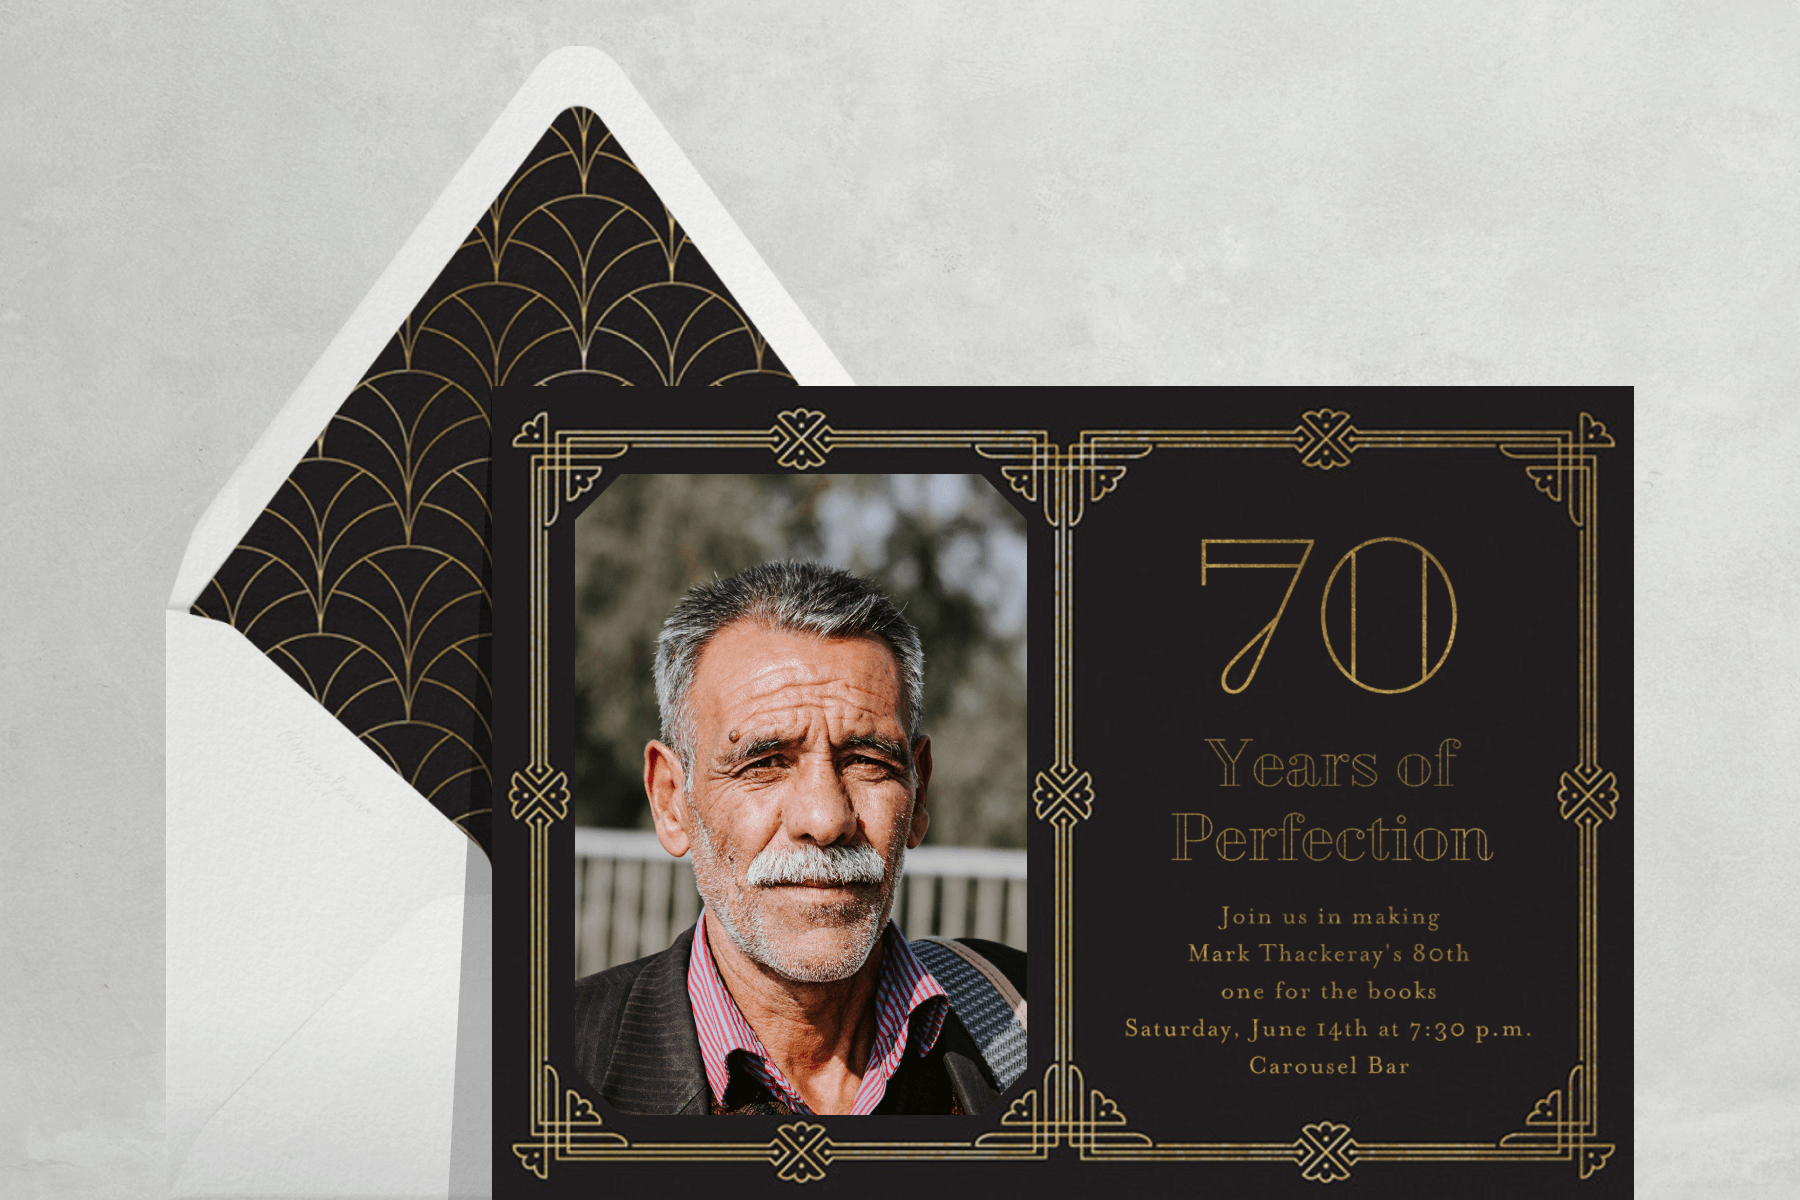 70th birthday invitation with a photo of a man and Art Deco-inspired gold foil border